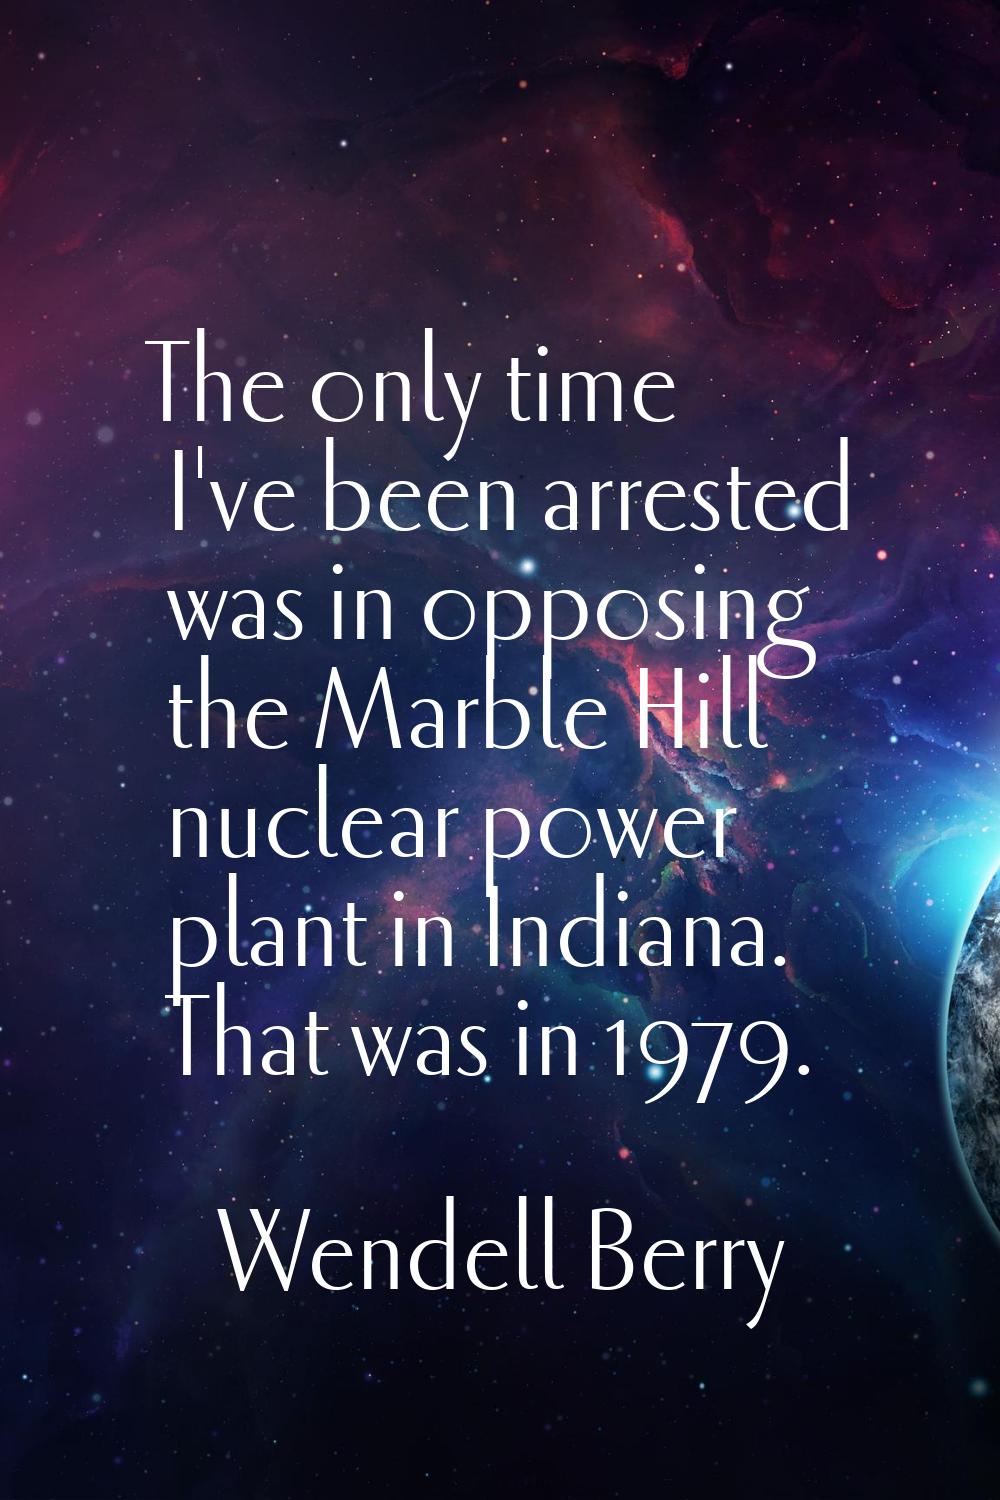 The only time I've been arrested was in opposing the Marble Hill nuclear power plant in Indiana. Th